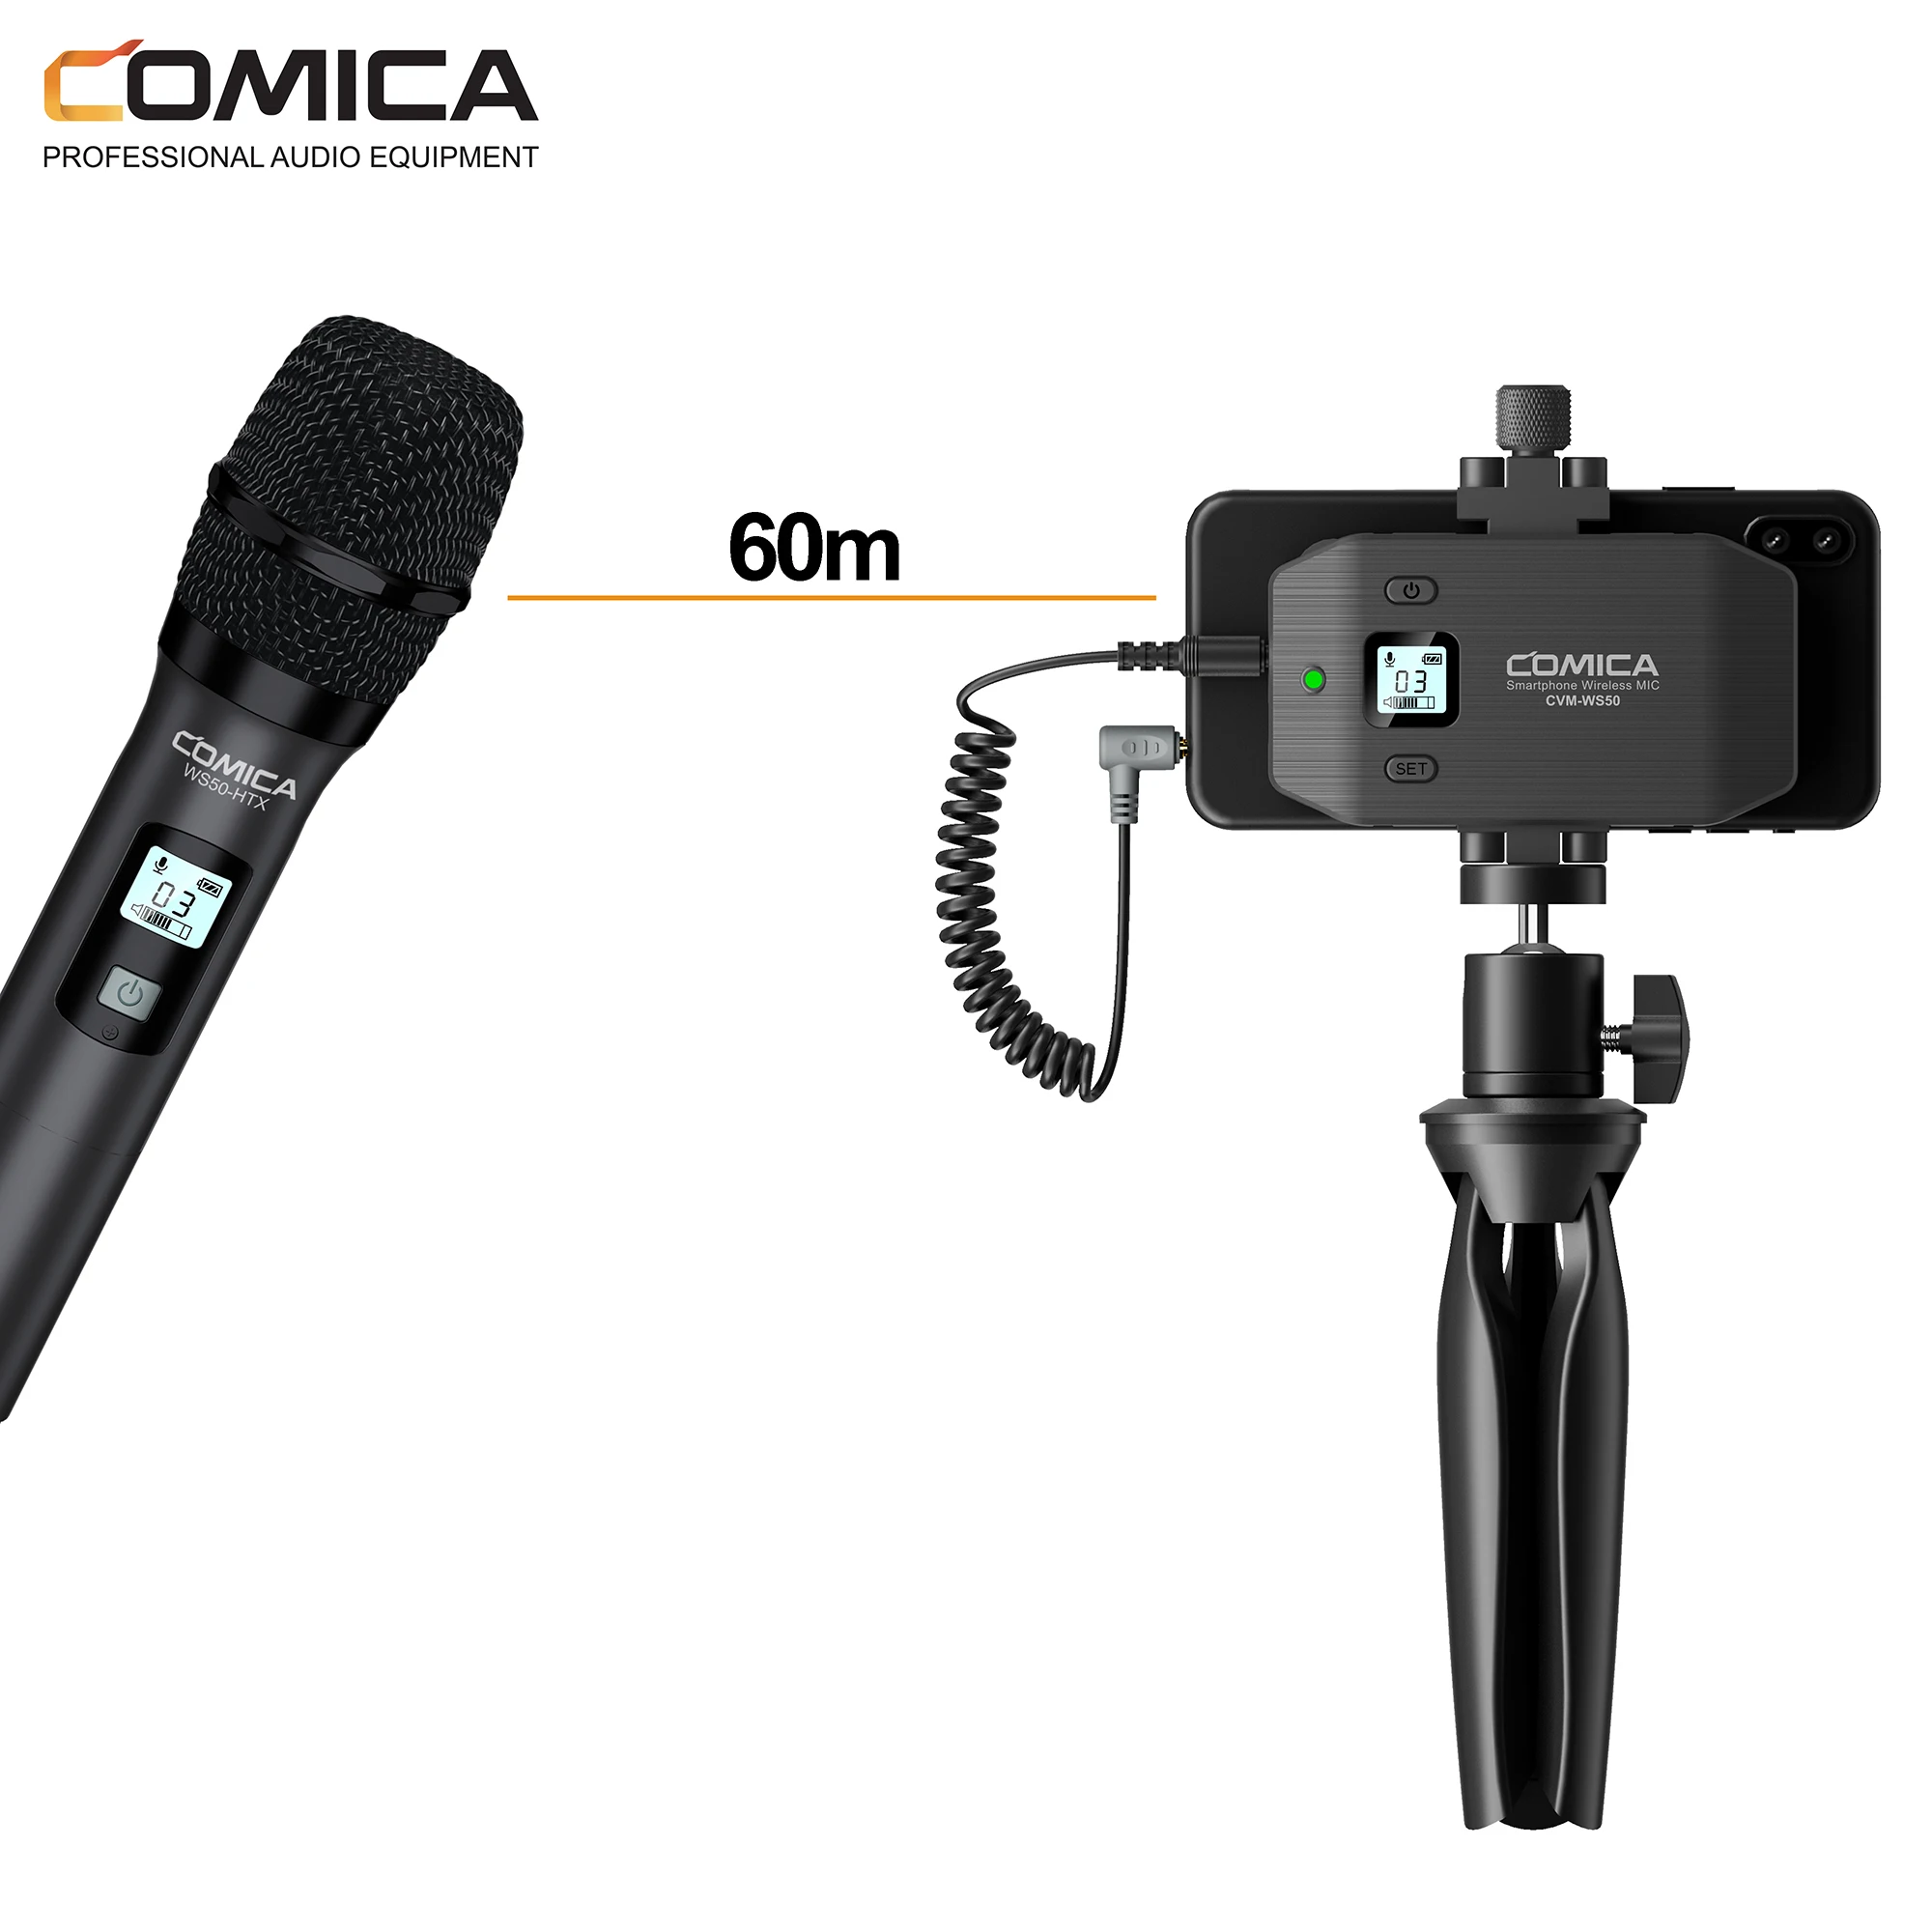 Comica CVM-WS50(H) Wireless Microphone System, 6 Channels Handheld  Interview Microphone with Flexible Combination Grip for Smartphone, Camera,  Perfect